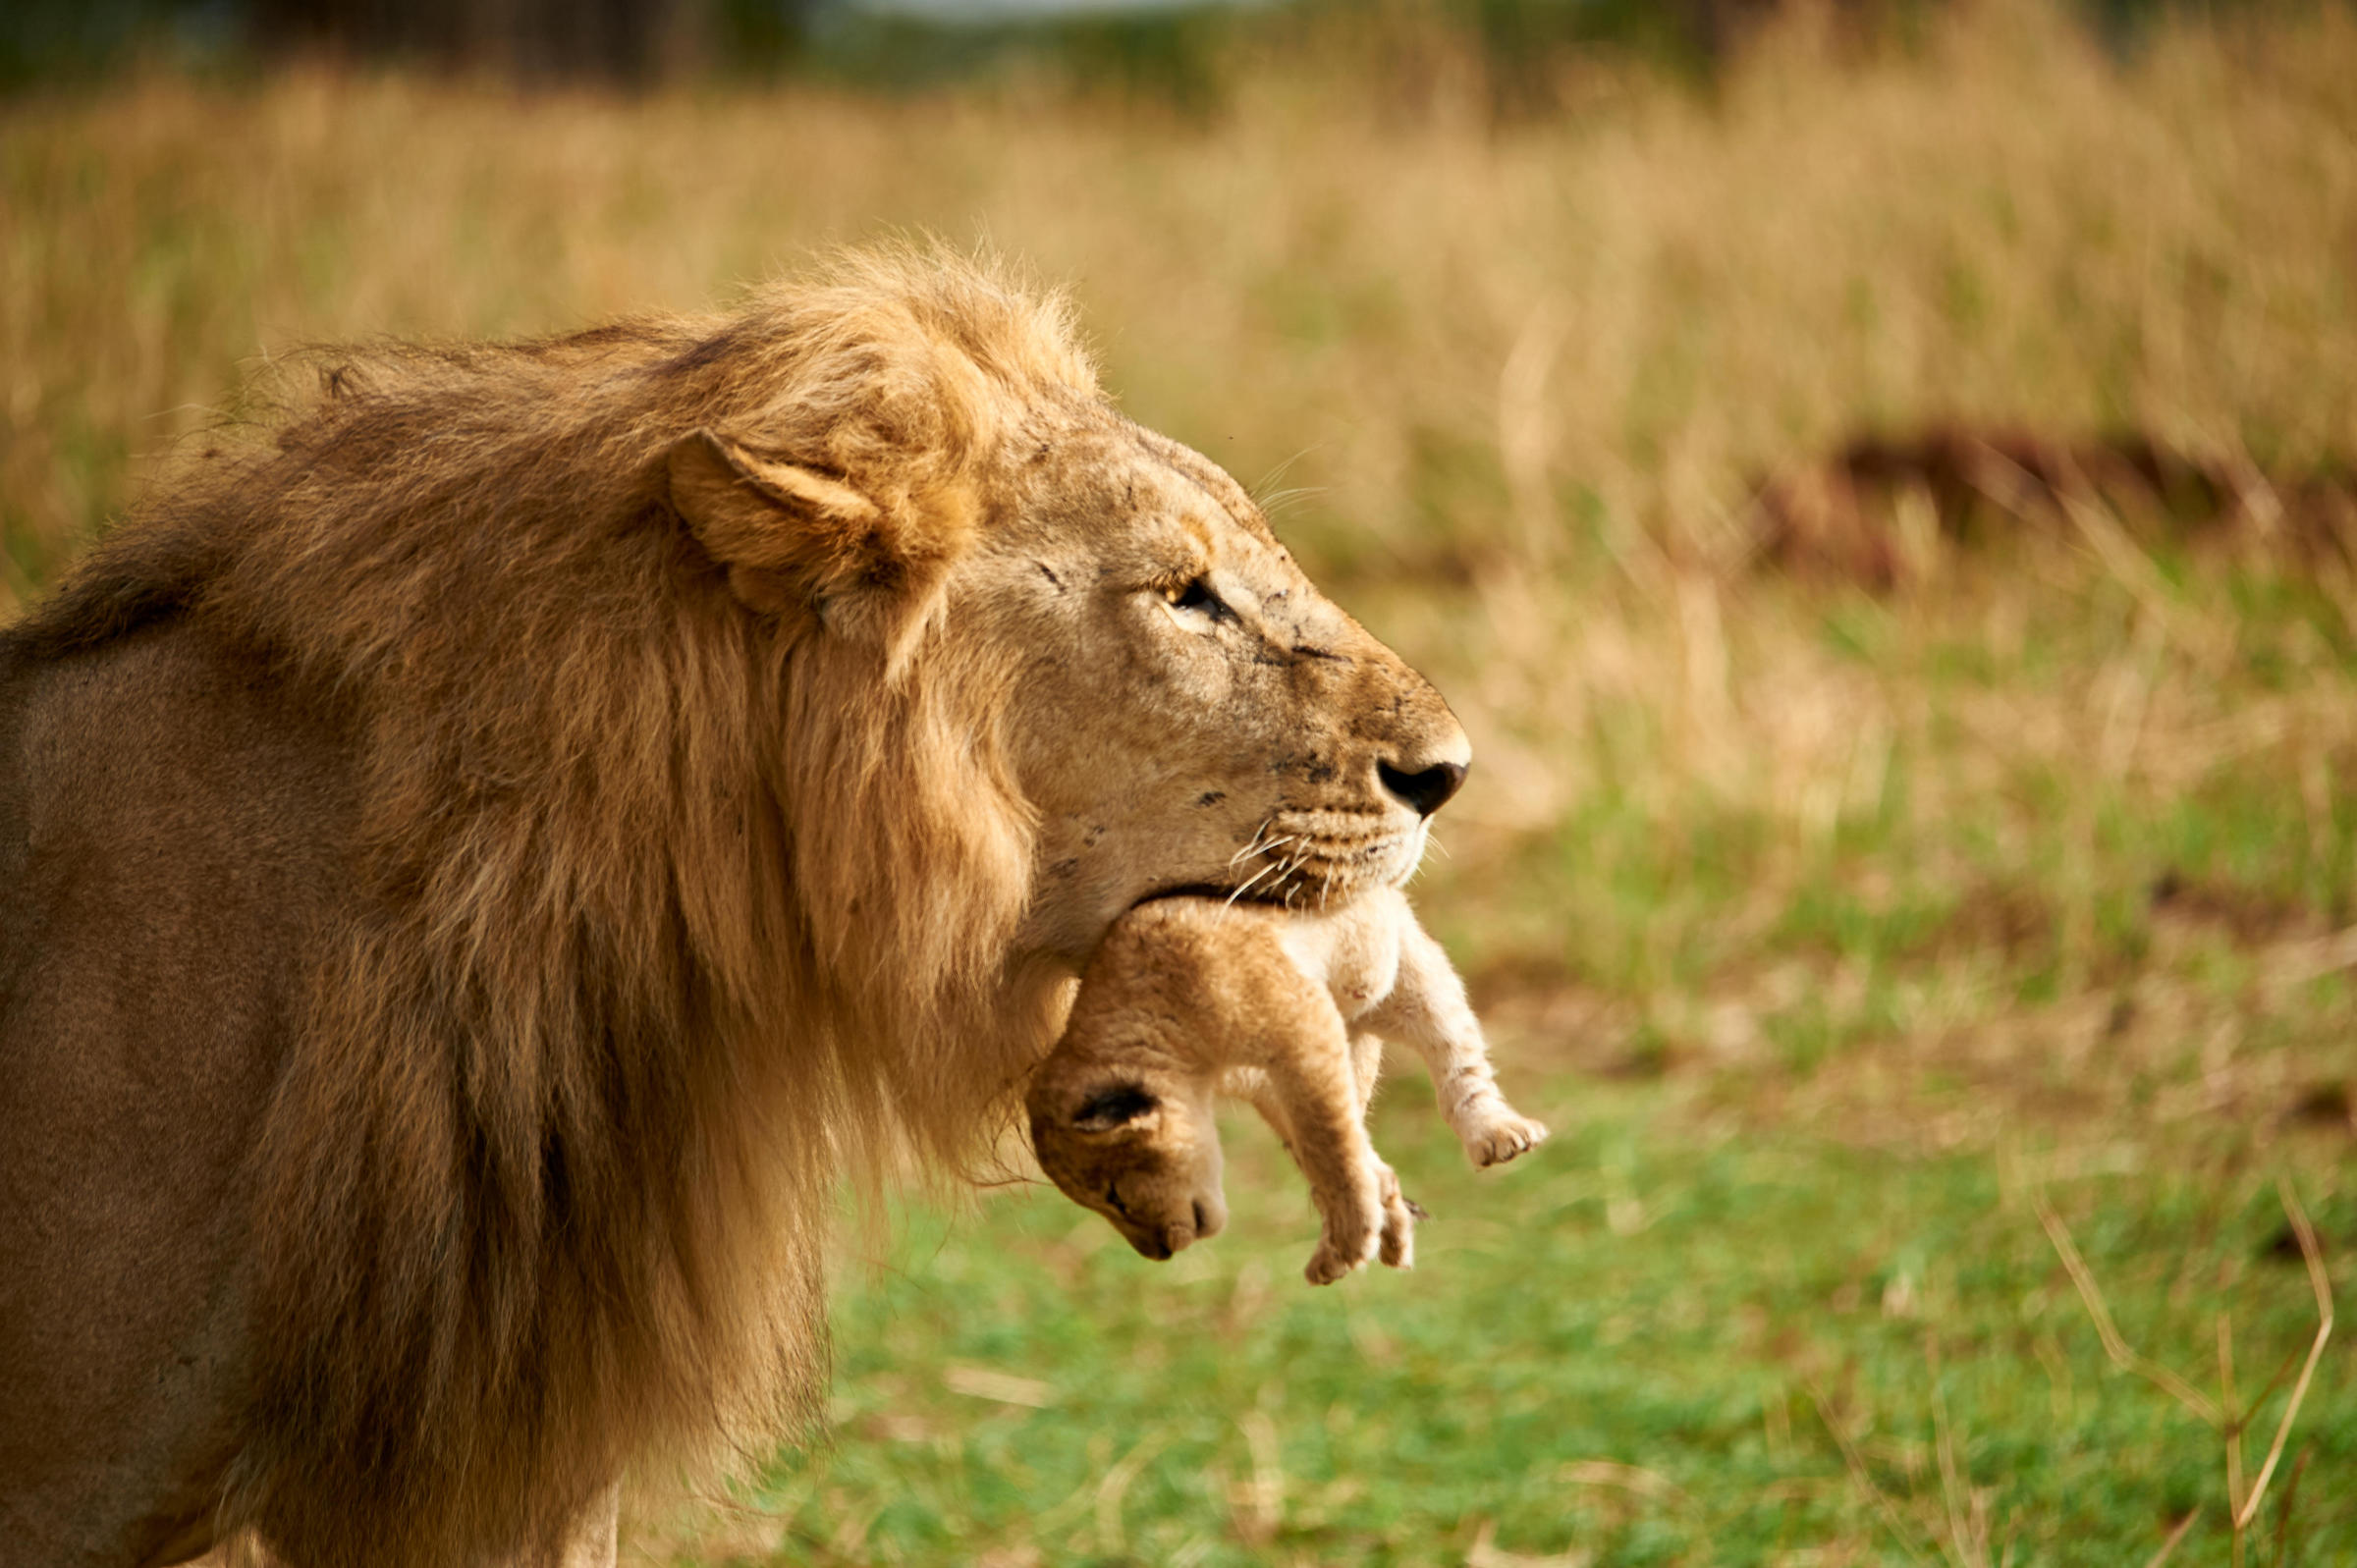 This male lion was carrying one of its own cubs. This is quite a rare occurrence. Usually you would see a male lion only carrying another male's offspring which he had killed to ensure his own bread stays superior, (Stephan Schramm—Alamy Stock Photo)